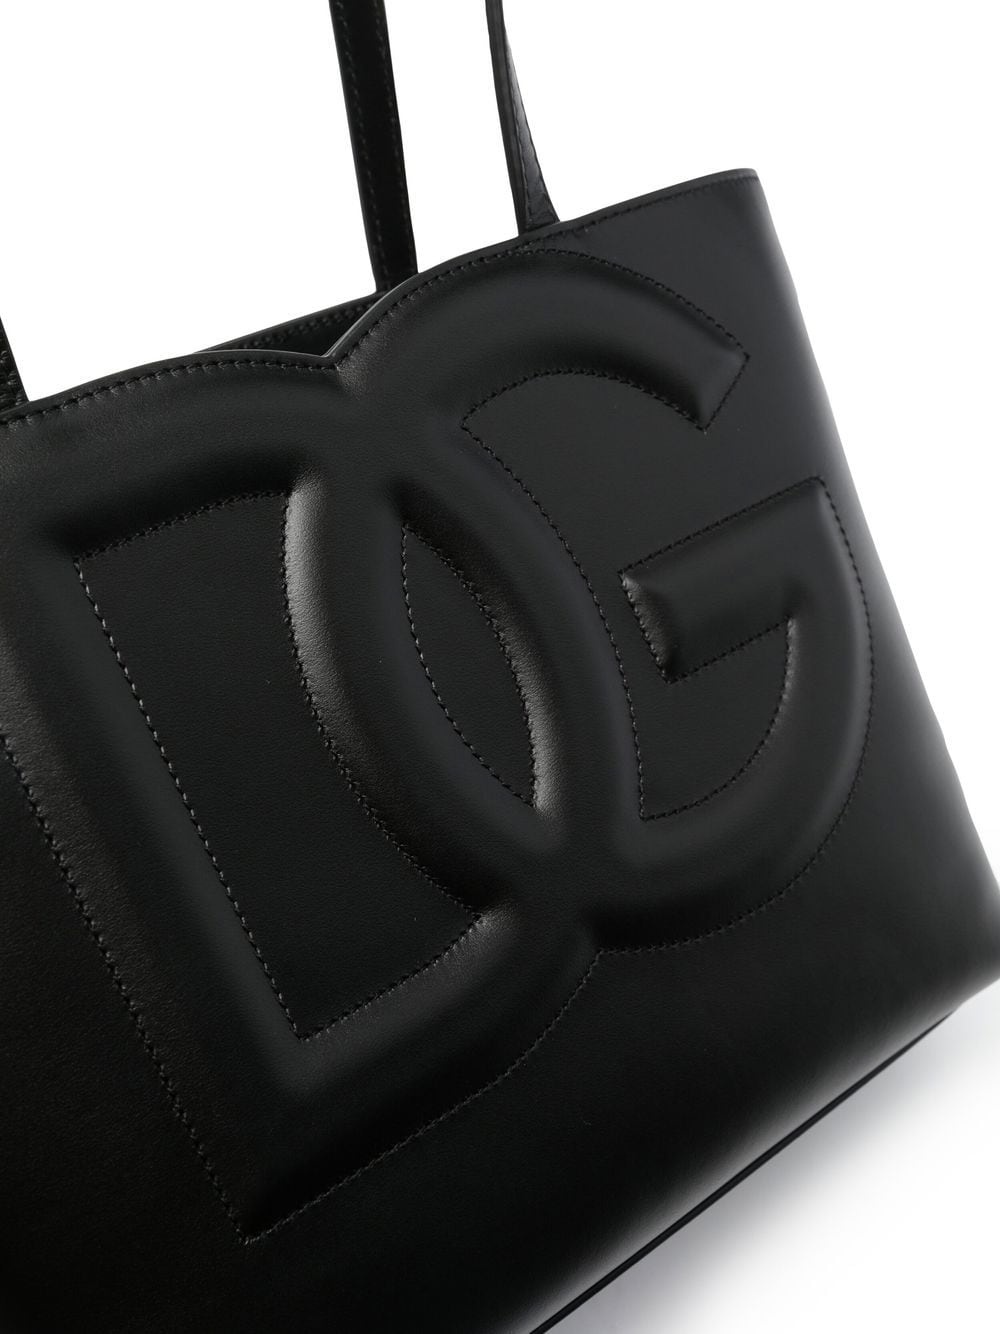 Dg logo small leather tote bag - 5